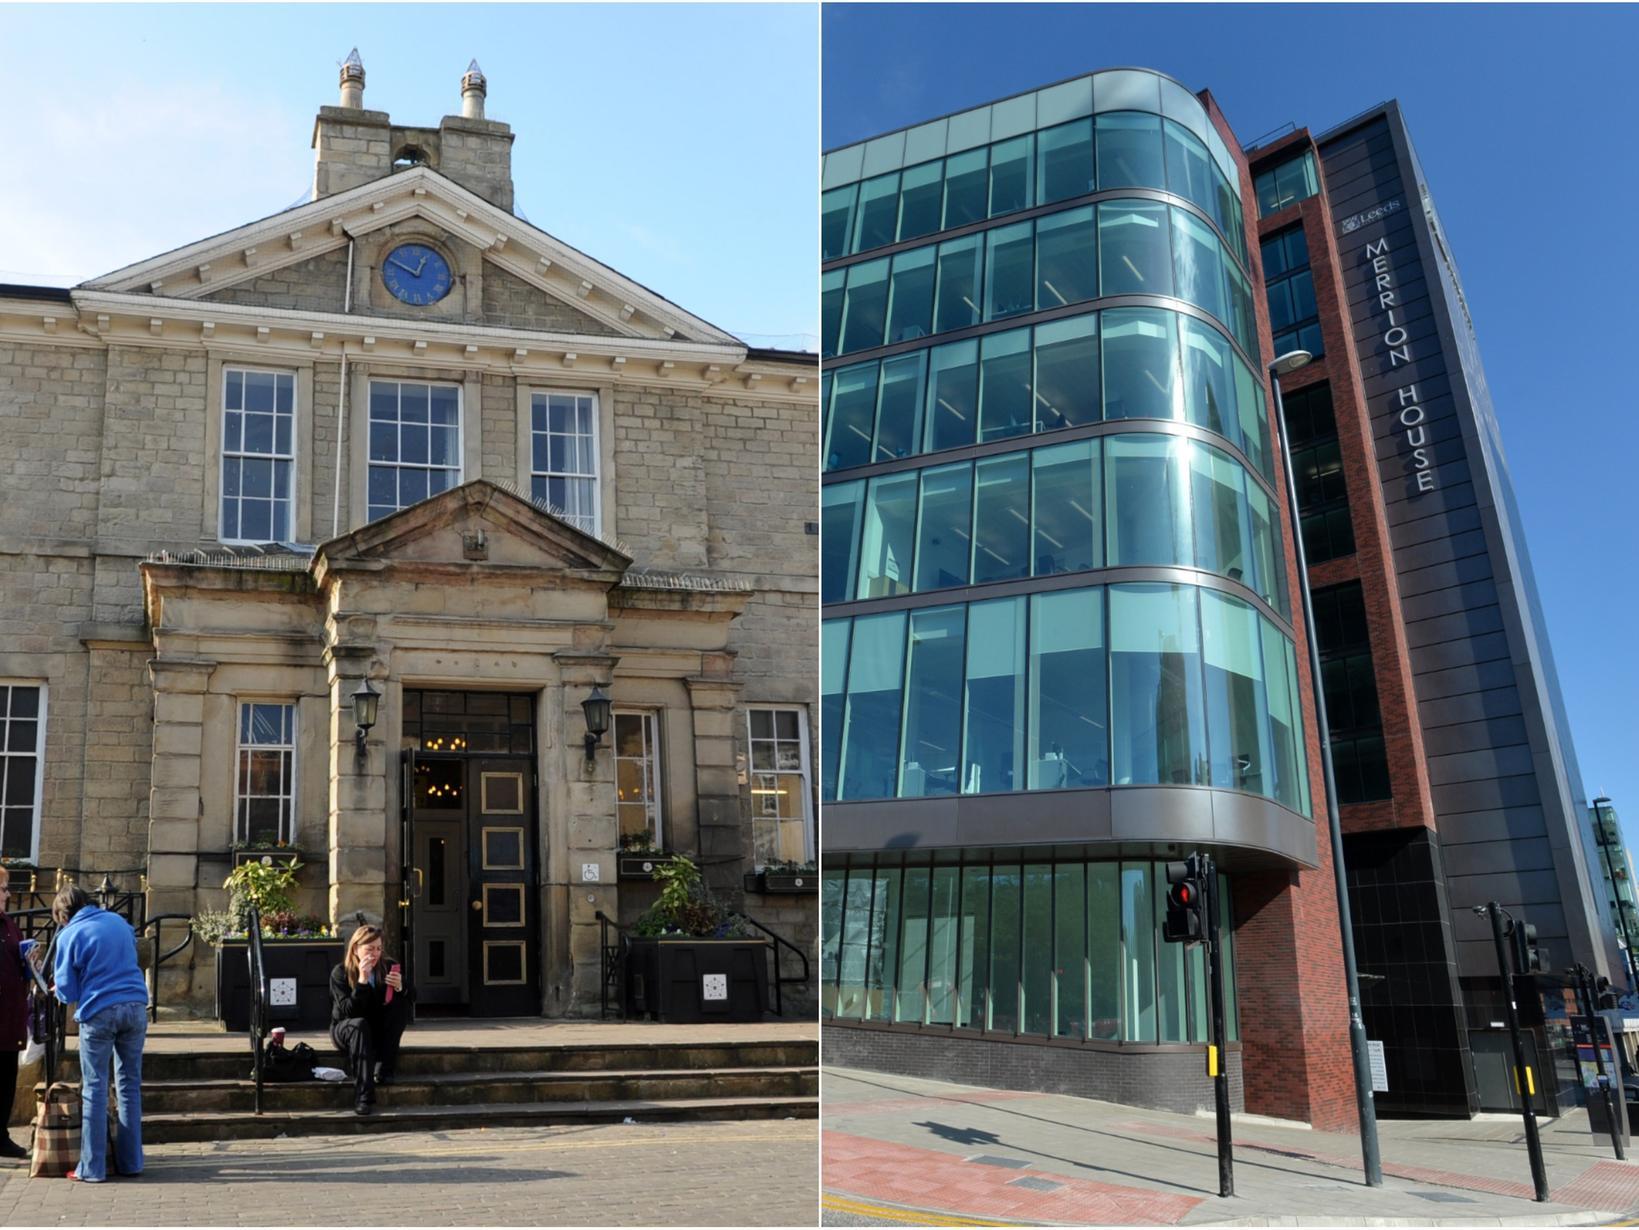 The 9 most expensive Leeds areas for council tax in 2019/20 revealed